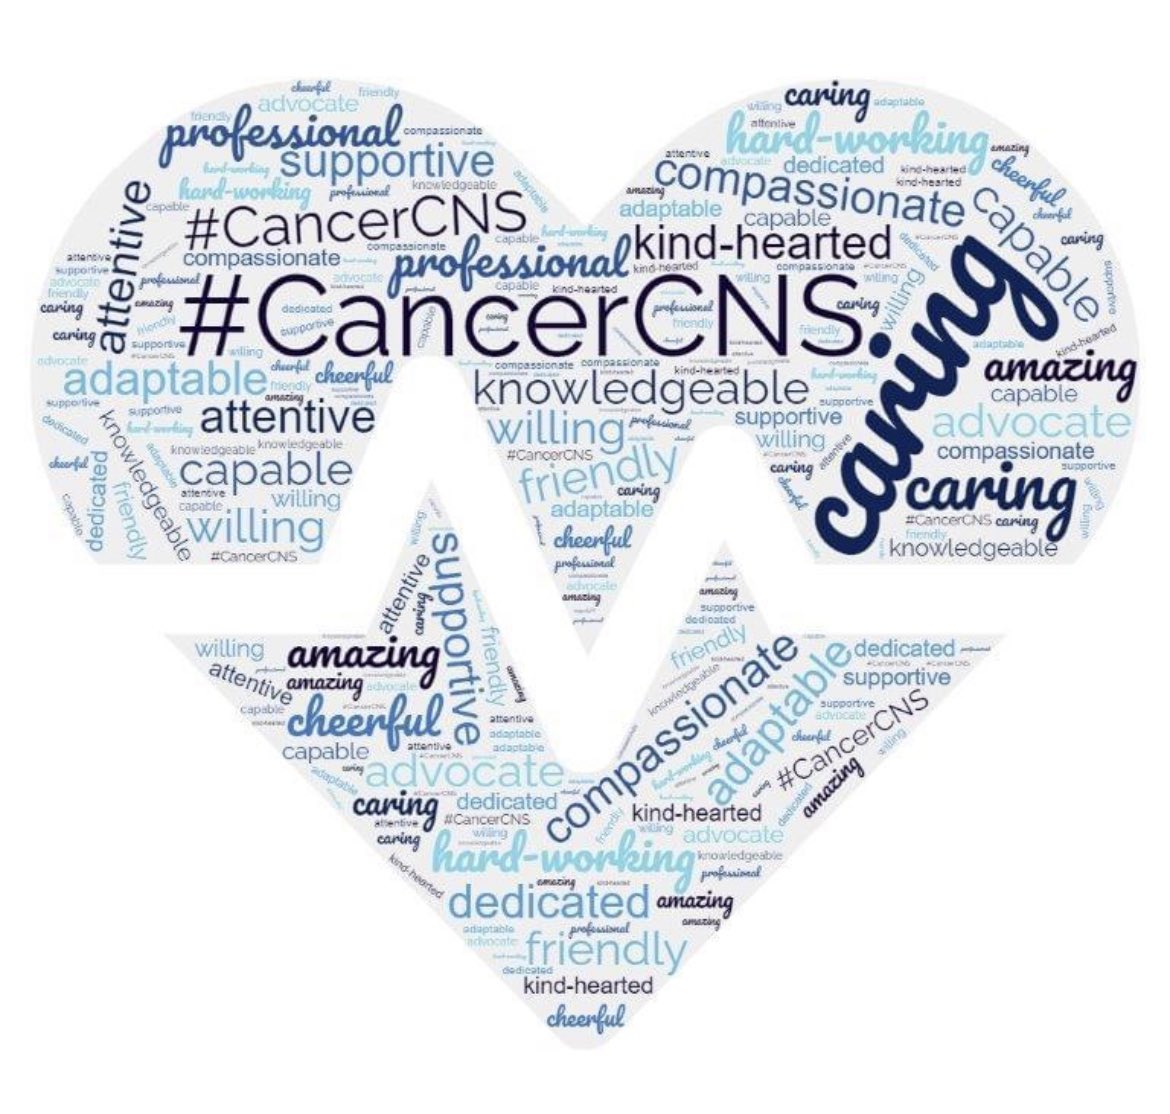 Today is the first #NationalCancerCNSDay. These are all words used by our @CDDFTNHS cancer services team when asked to describe our CNSs. They make more difference than they can realise and deserve a day to be appreciated and feel valued. #improvingcancercare #cancerworkforce